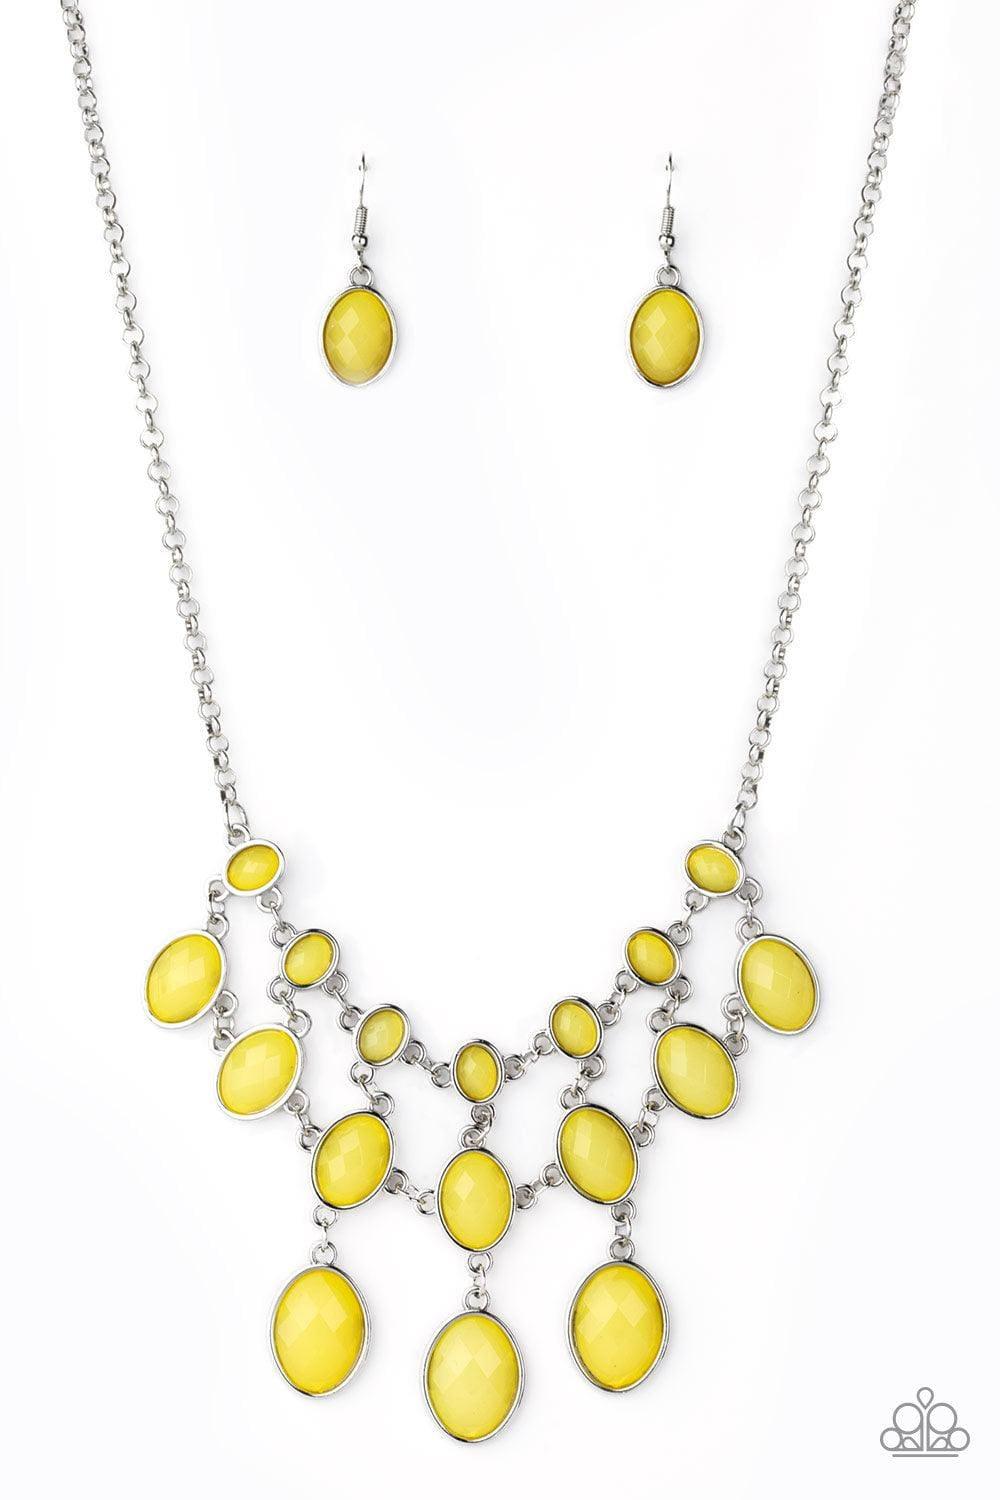 Paparazzi Accessories - Mermaid Marmalade - Yellow Necklace - Bling by JessieK